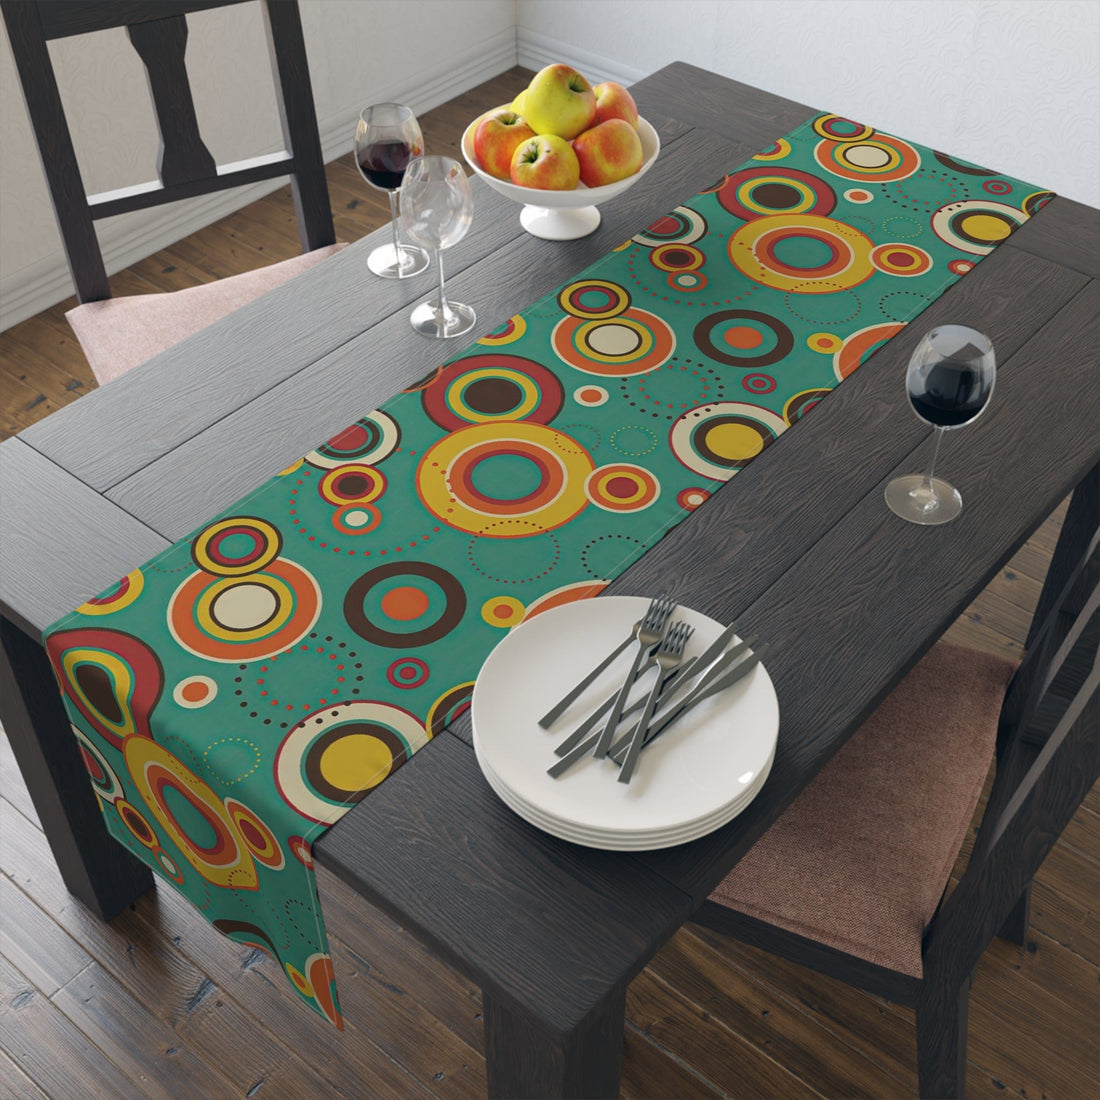 Printify Retro Mid Century Modern Geometric Circles Table Runner, MCM Green, Mustard Yellow, Orange Kitchen Decor, 60s Vintage Style Table Covers Home Decor 16&quot; × 72&quot; / Cotton Twill 16377839155932766053